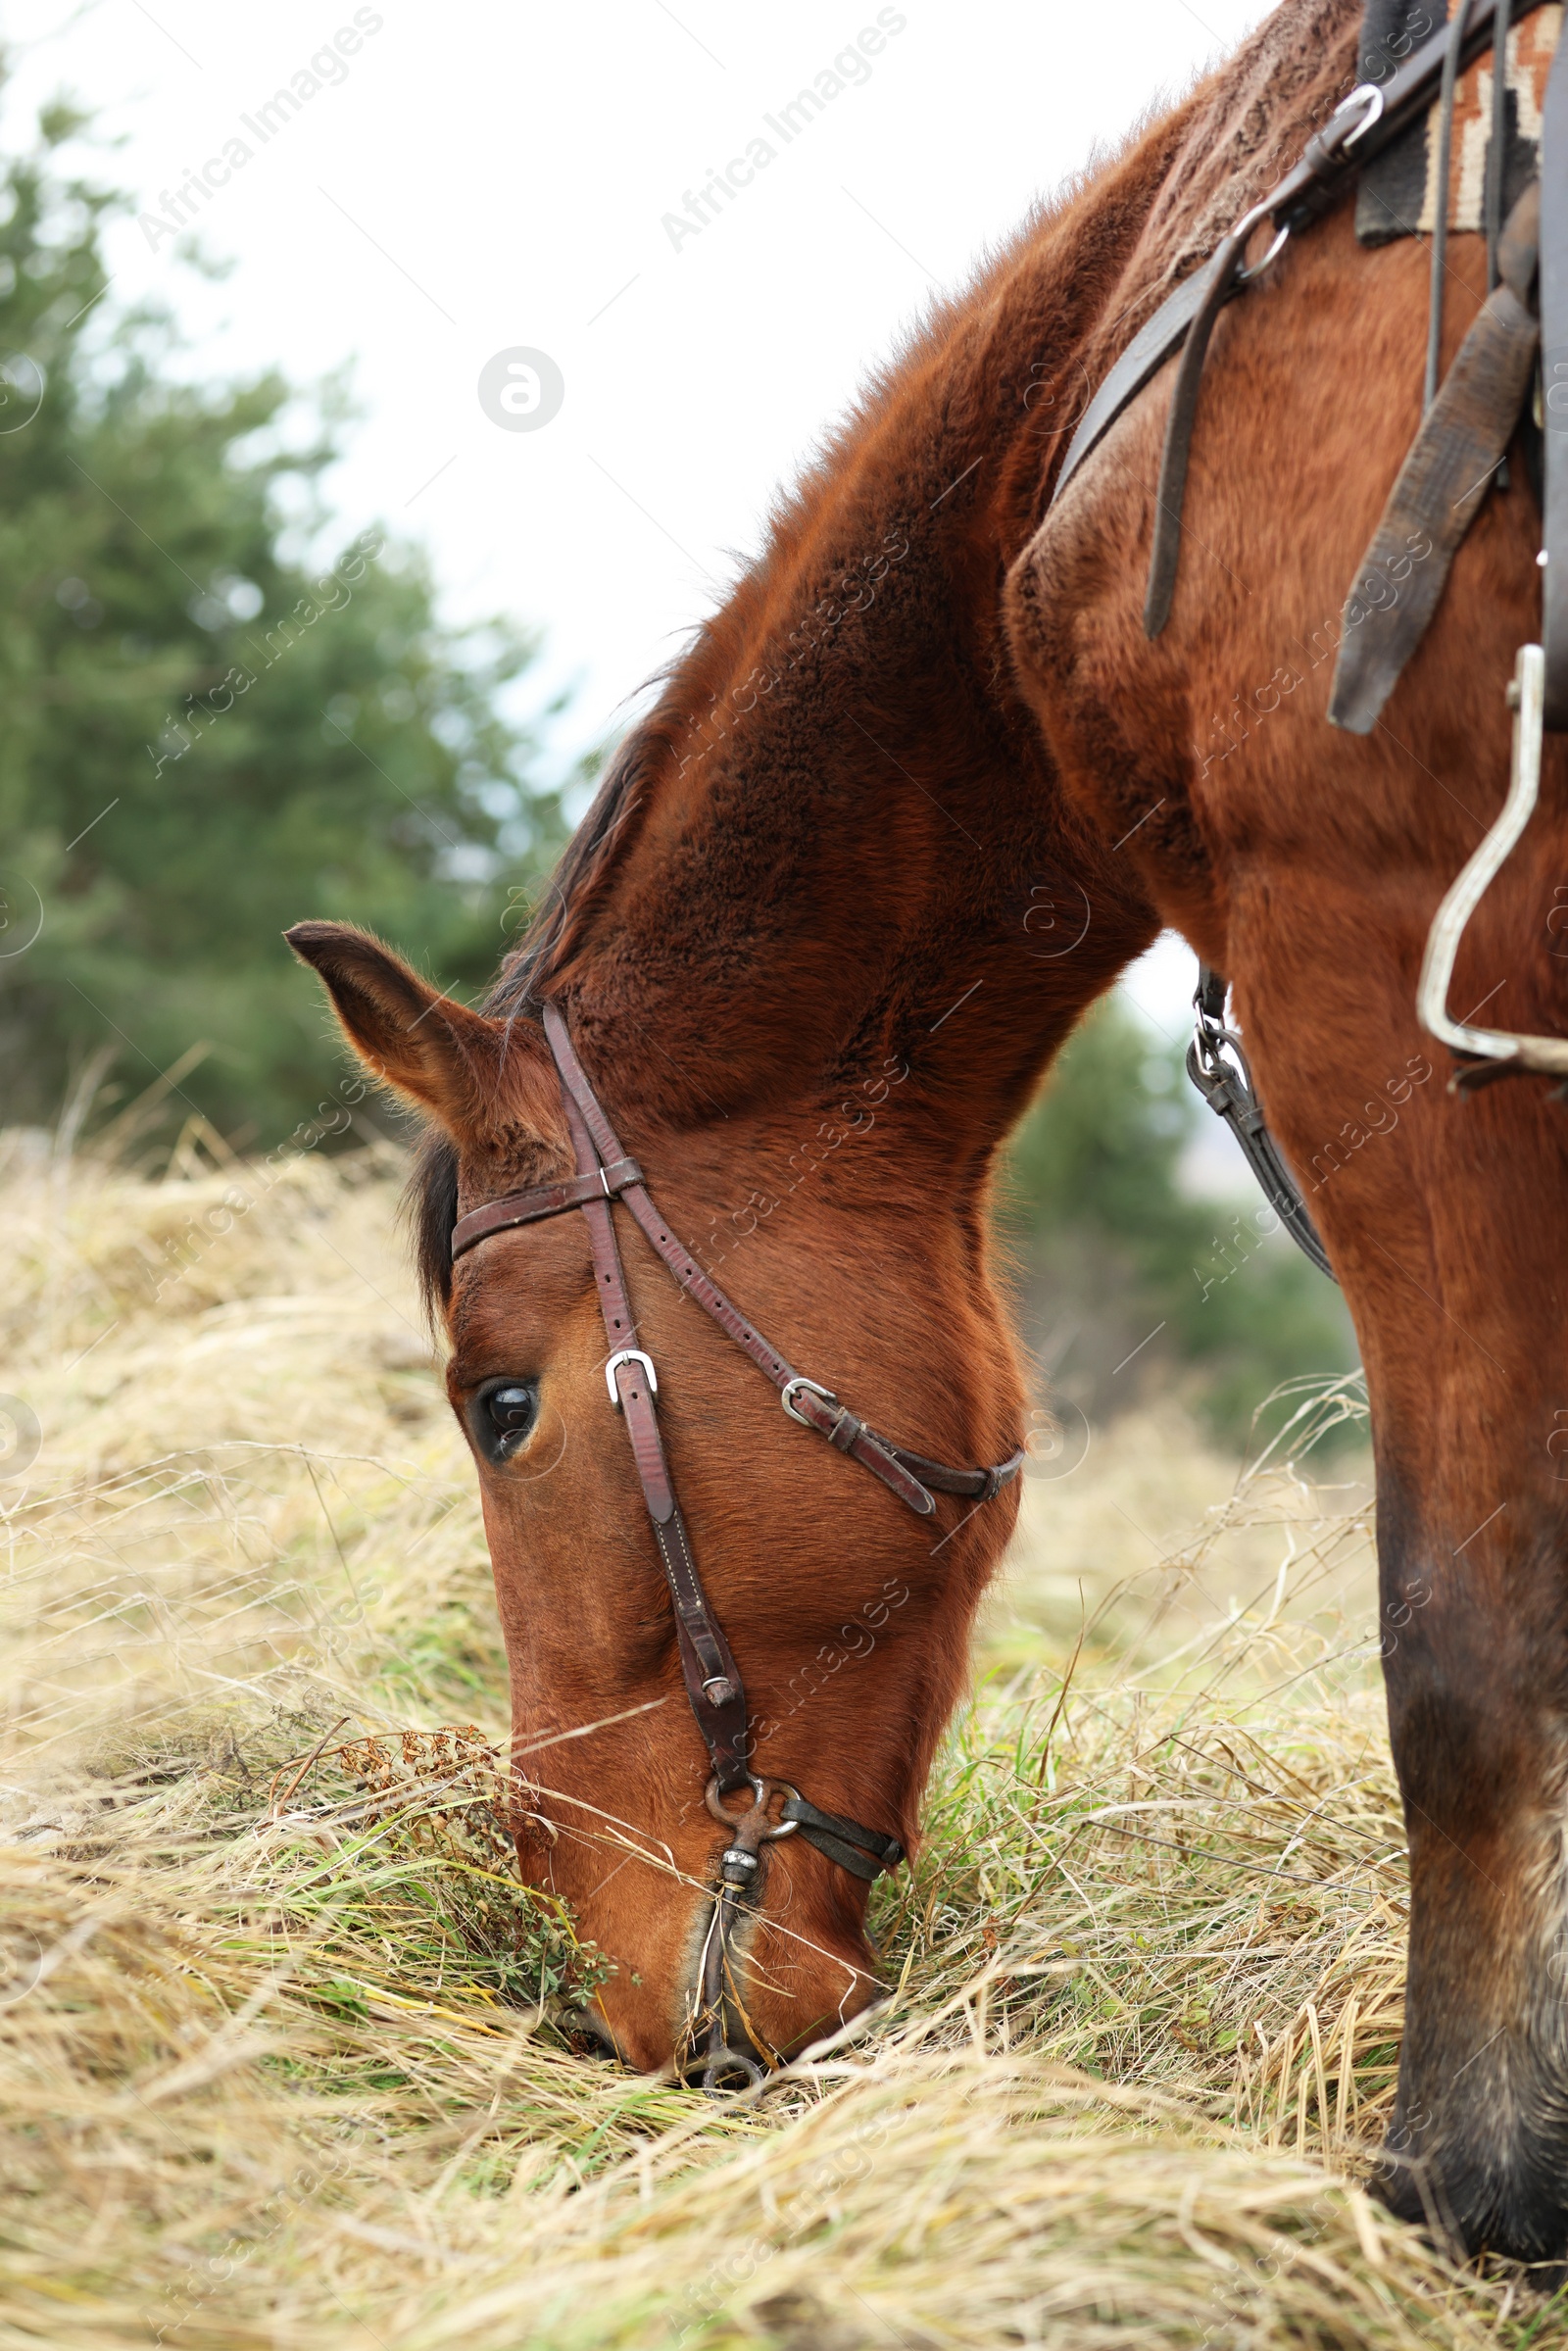 Photo of Adorable chestnut horse grazing outdoors. Lovely domesticated pet